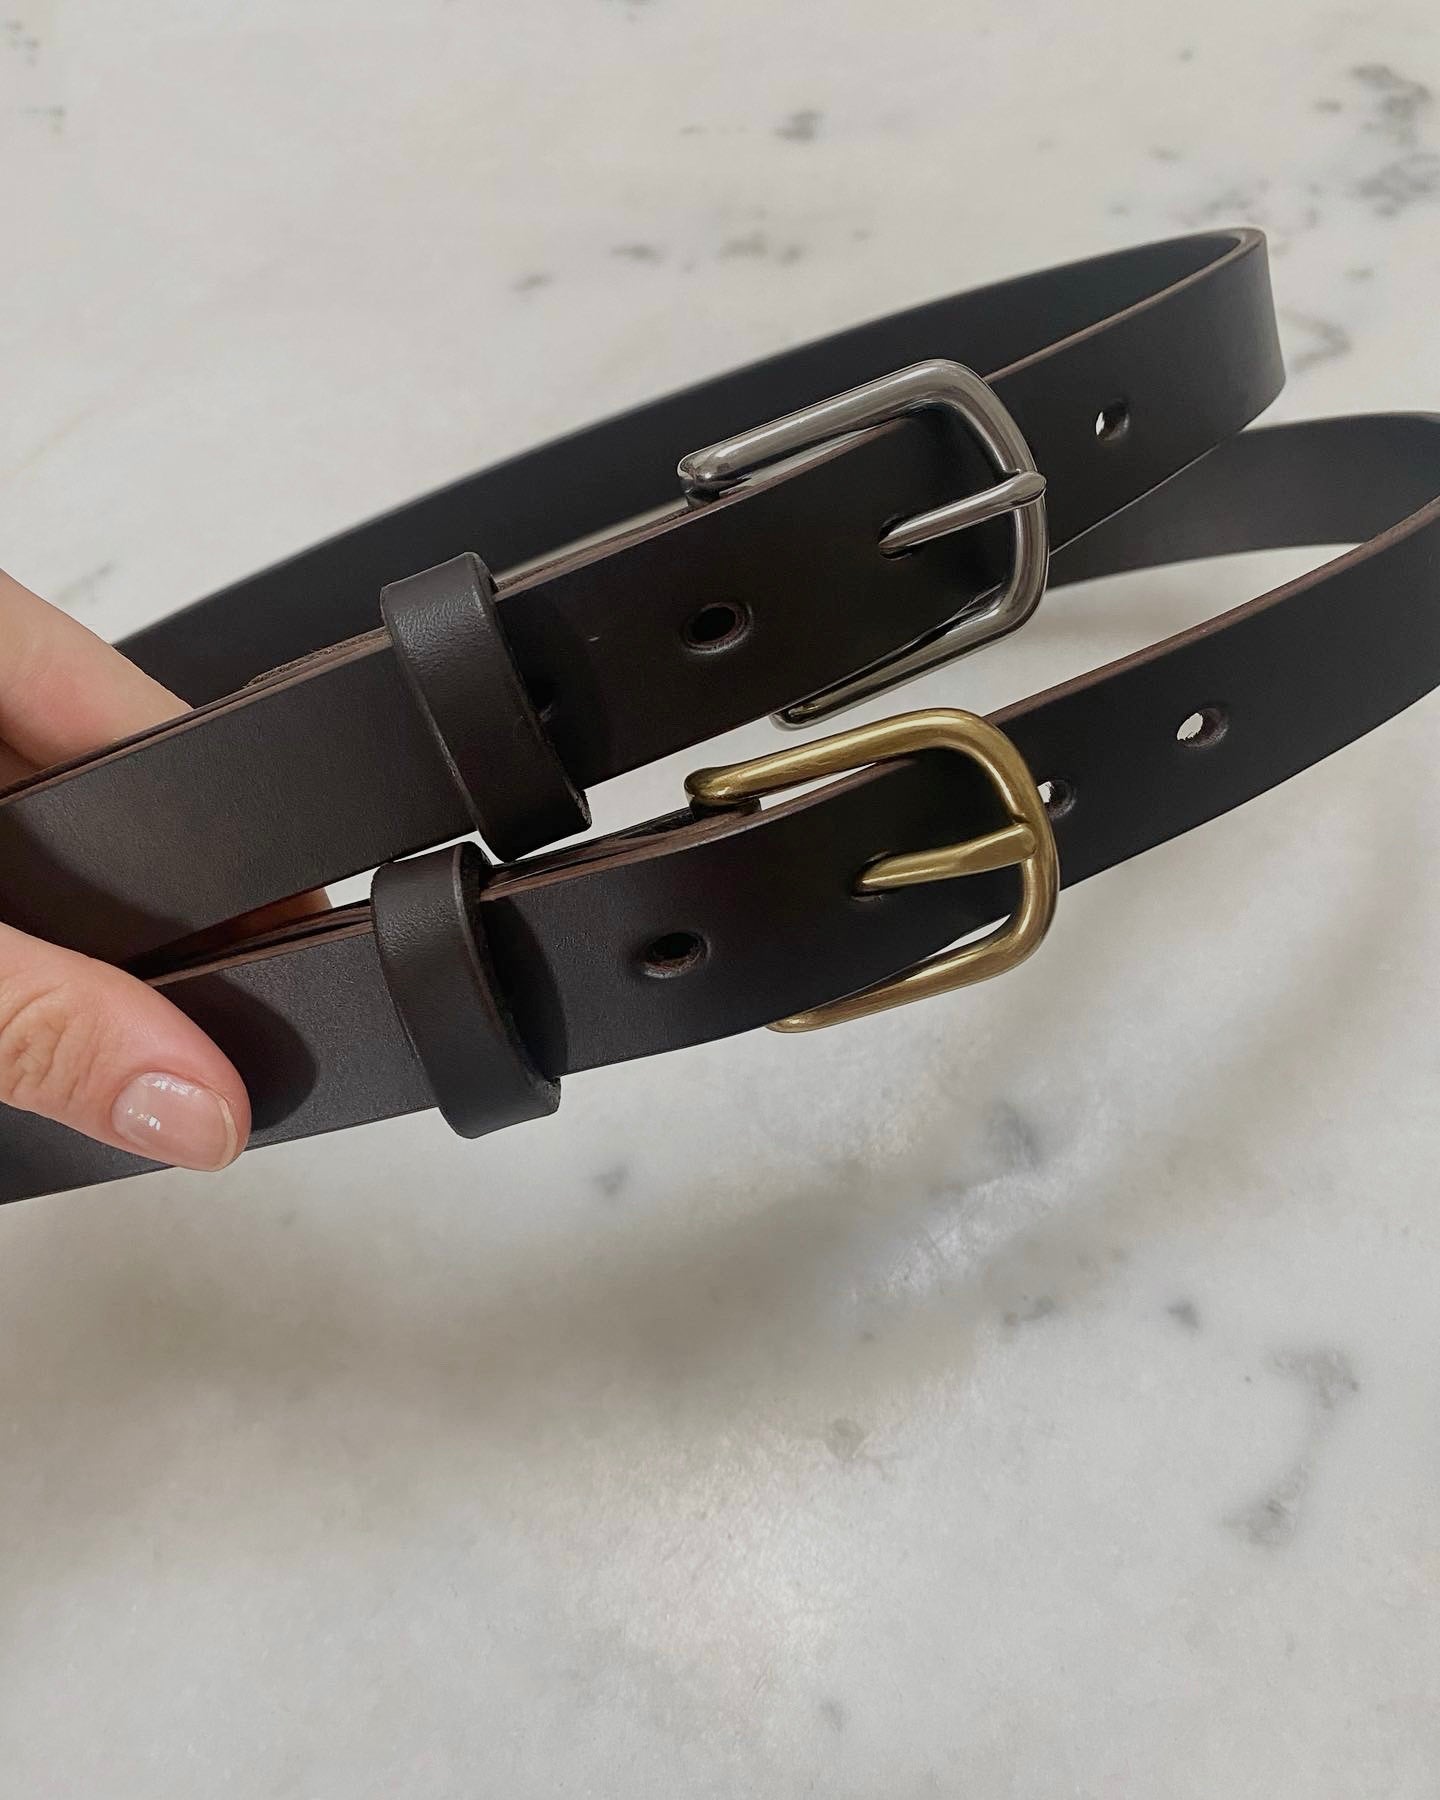 SAINT classic leather belt in brown leather with stainless steel buckle. made in Australia using traditional leather smith techniques. 100% Italian leather